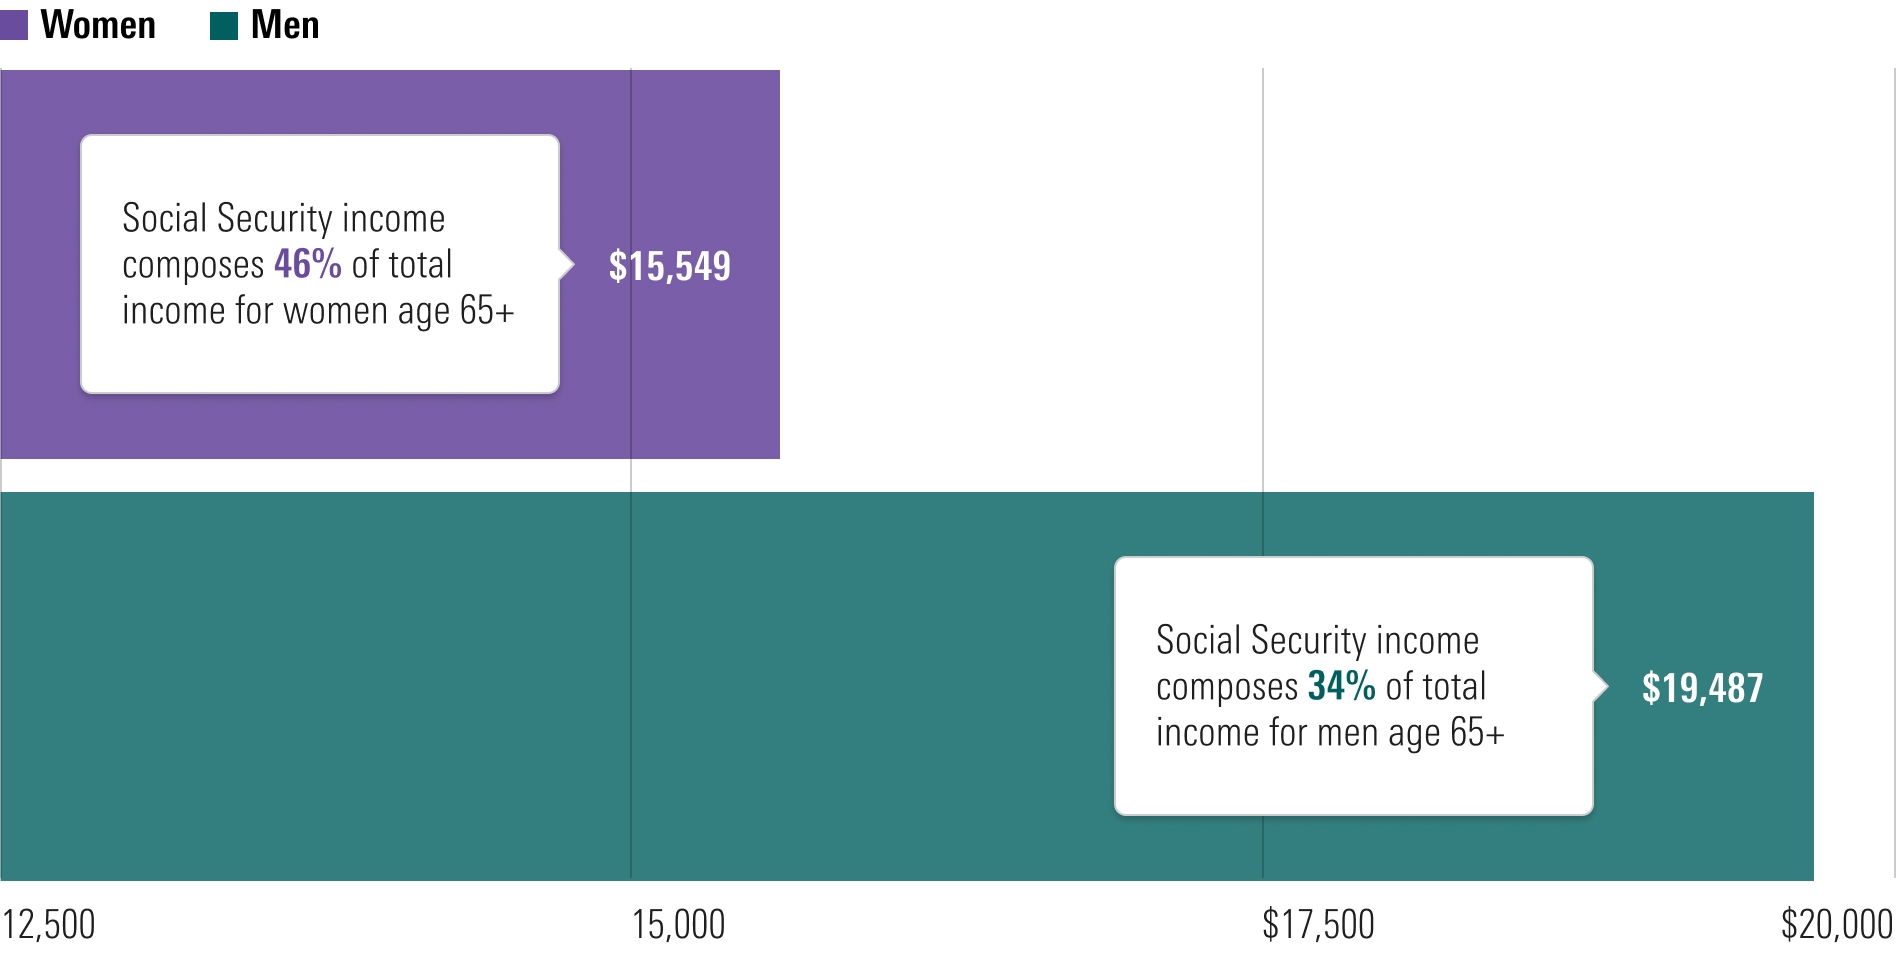 Horizontal bar chart showing how men and women’s Social Security incomes differ.